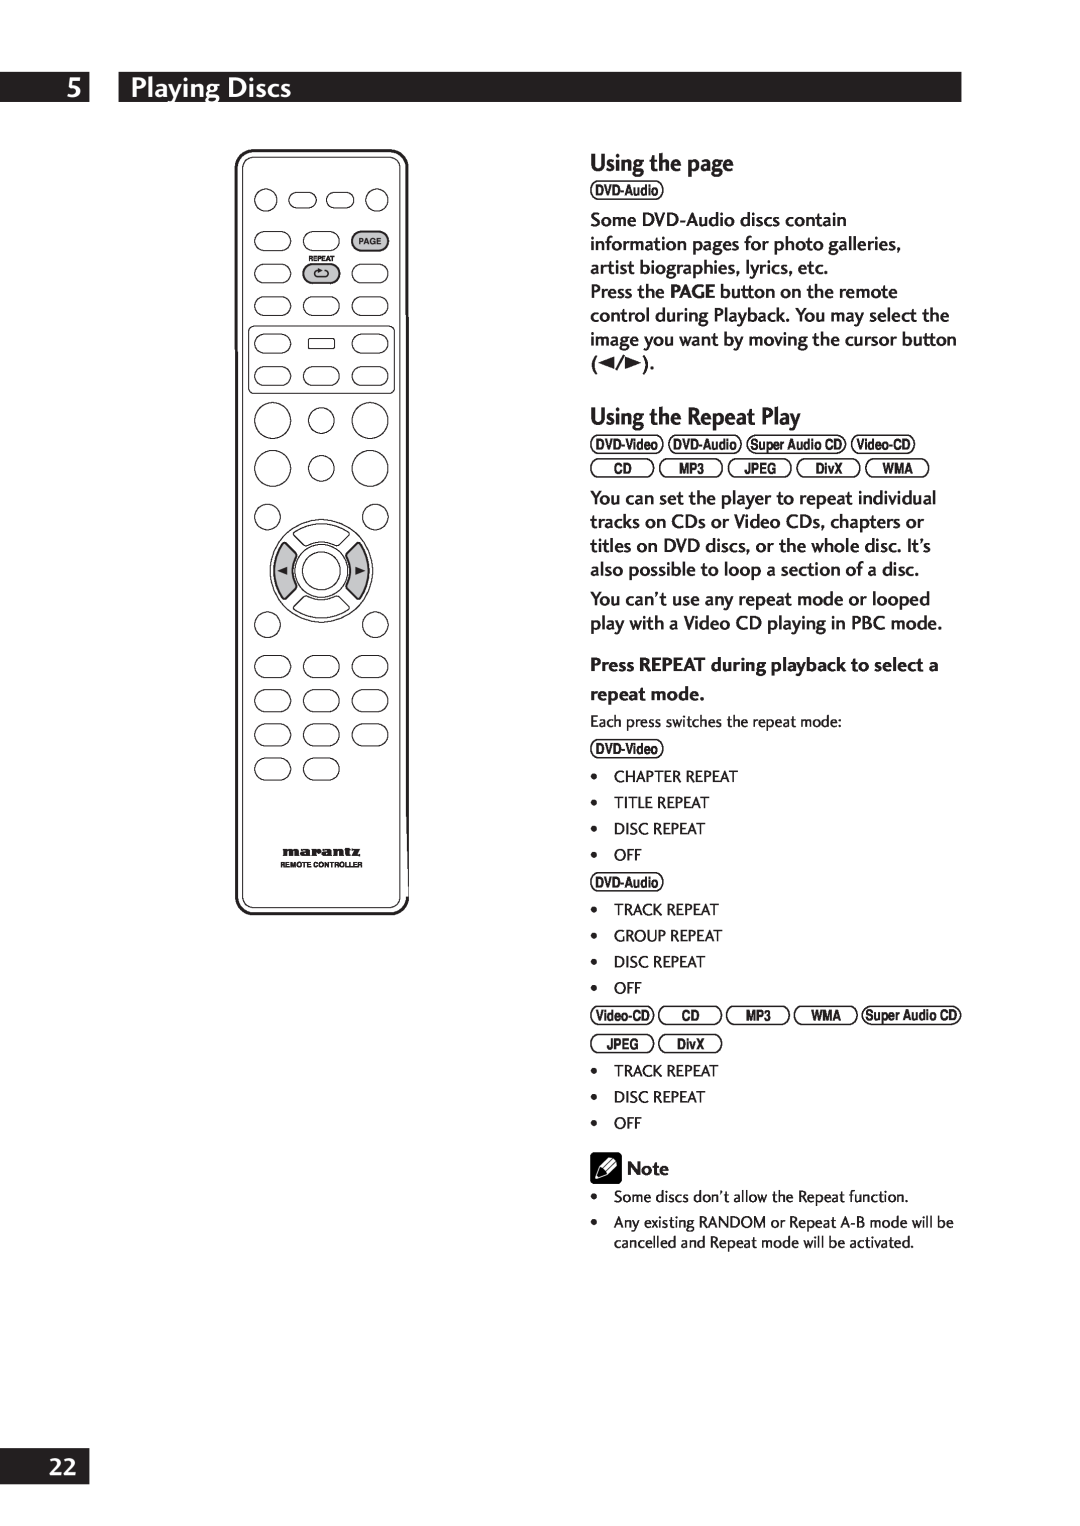 Marantz DV7001 Using the page, Using the Repeat Play, Press REPEAT during playback to select a, repeat mode, Playing Discs 